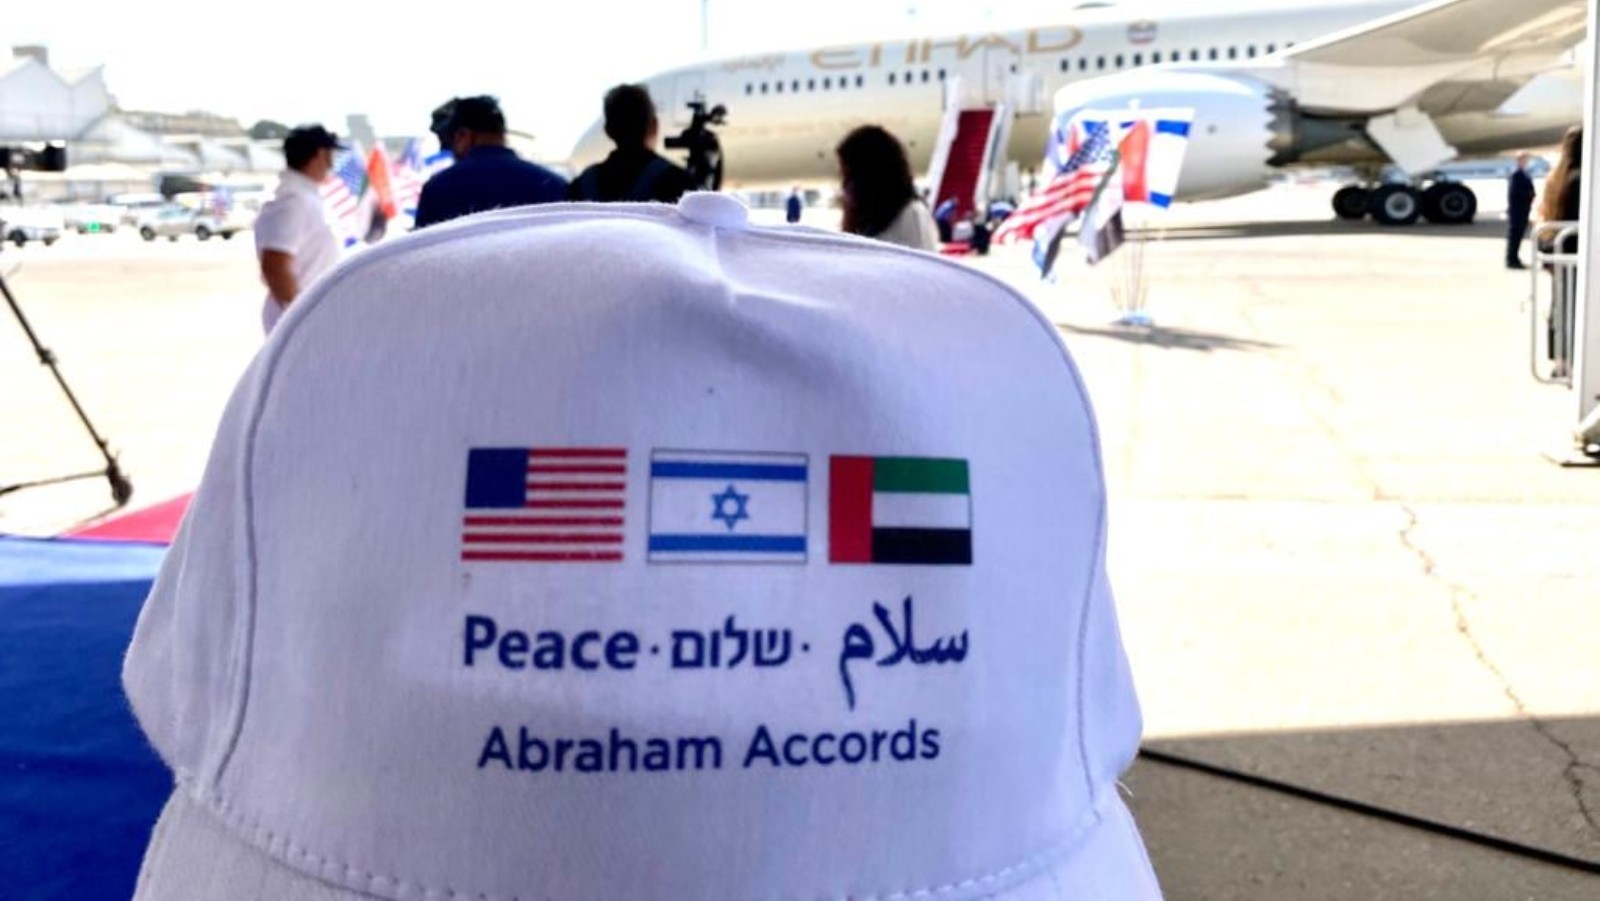 Hats hailing the first official UAE visit to Israel, at Ben-Gurion International Airport, October 20, 2020. Photo courtesy of Israeli Ministry of Foreign Affairs